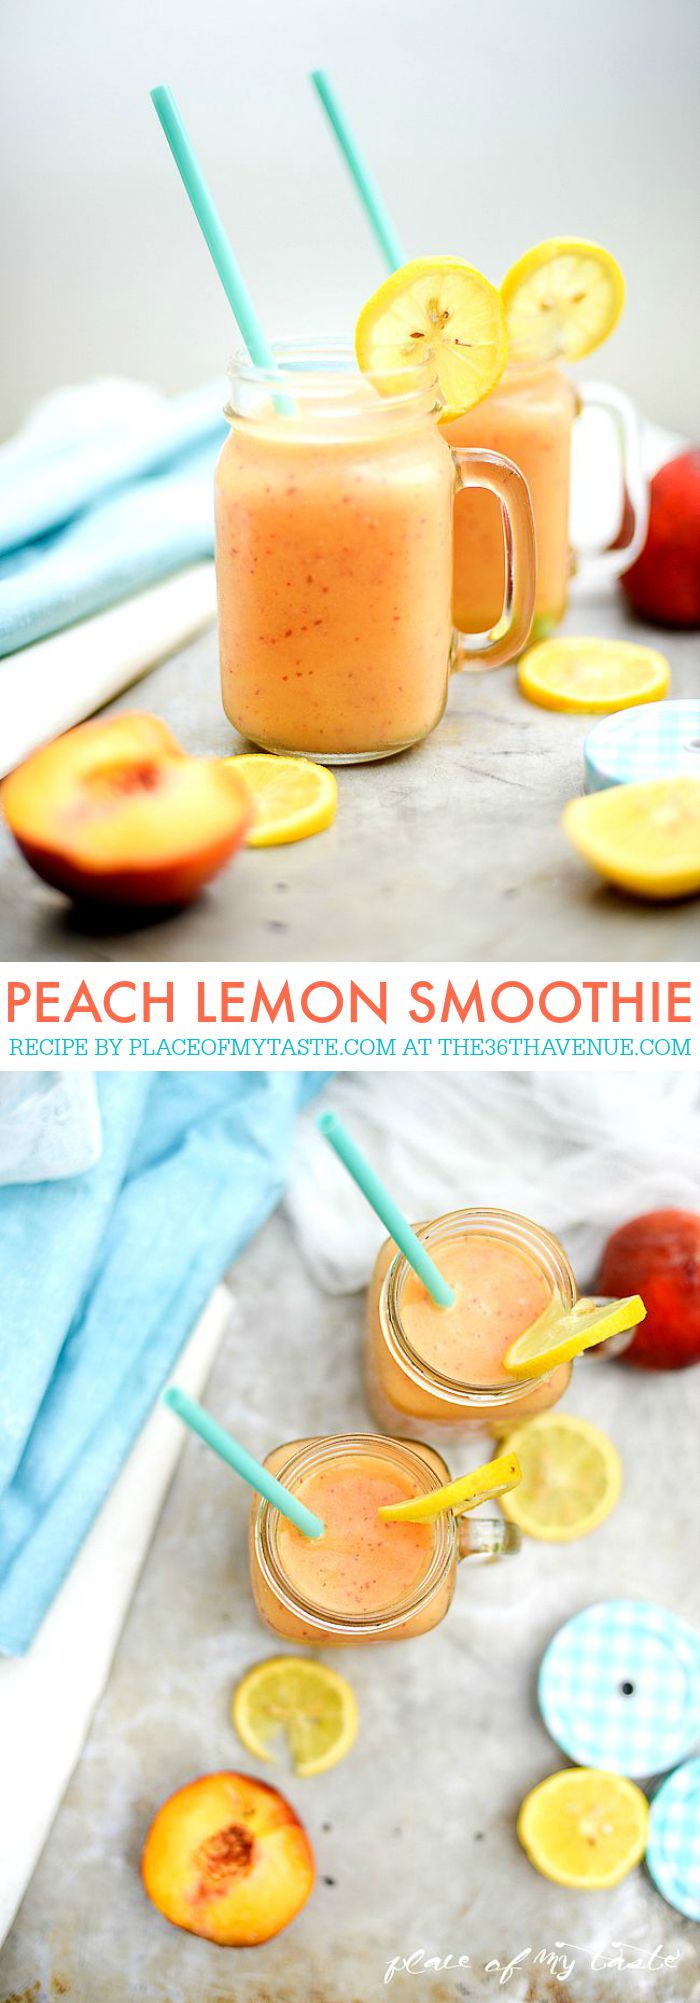 Fruit Smoothie Recipes that are a great alternative to ice cream or shakes and a perfect choice for breakfast or a healthy snack.